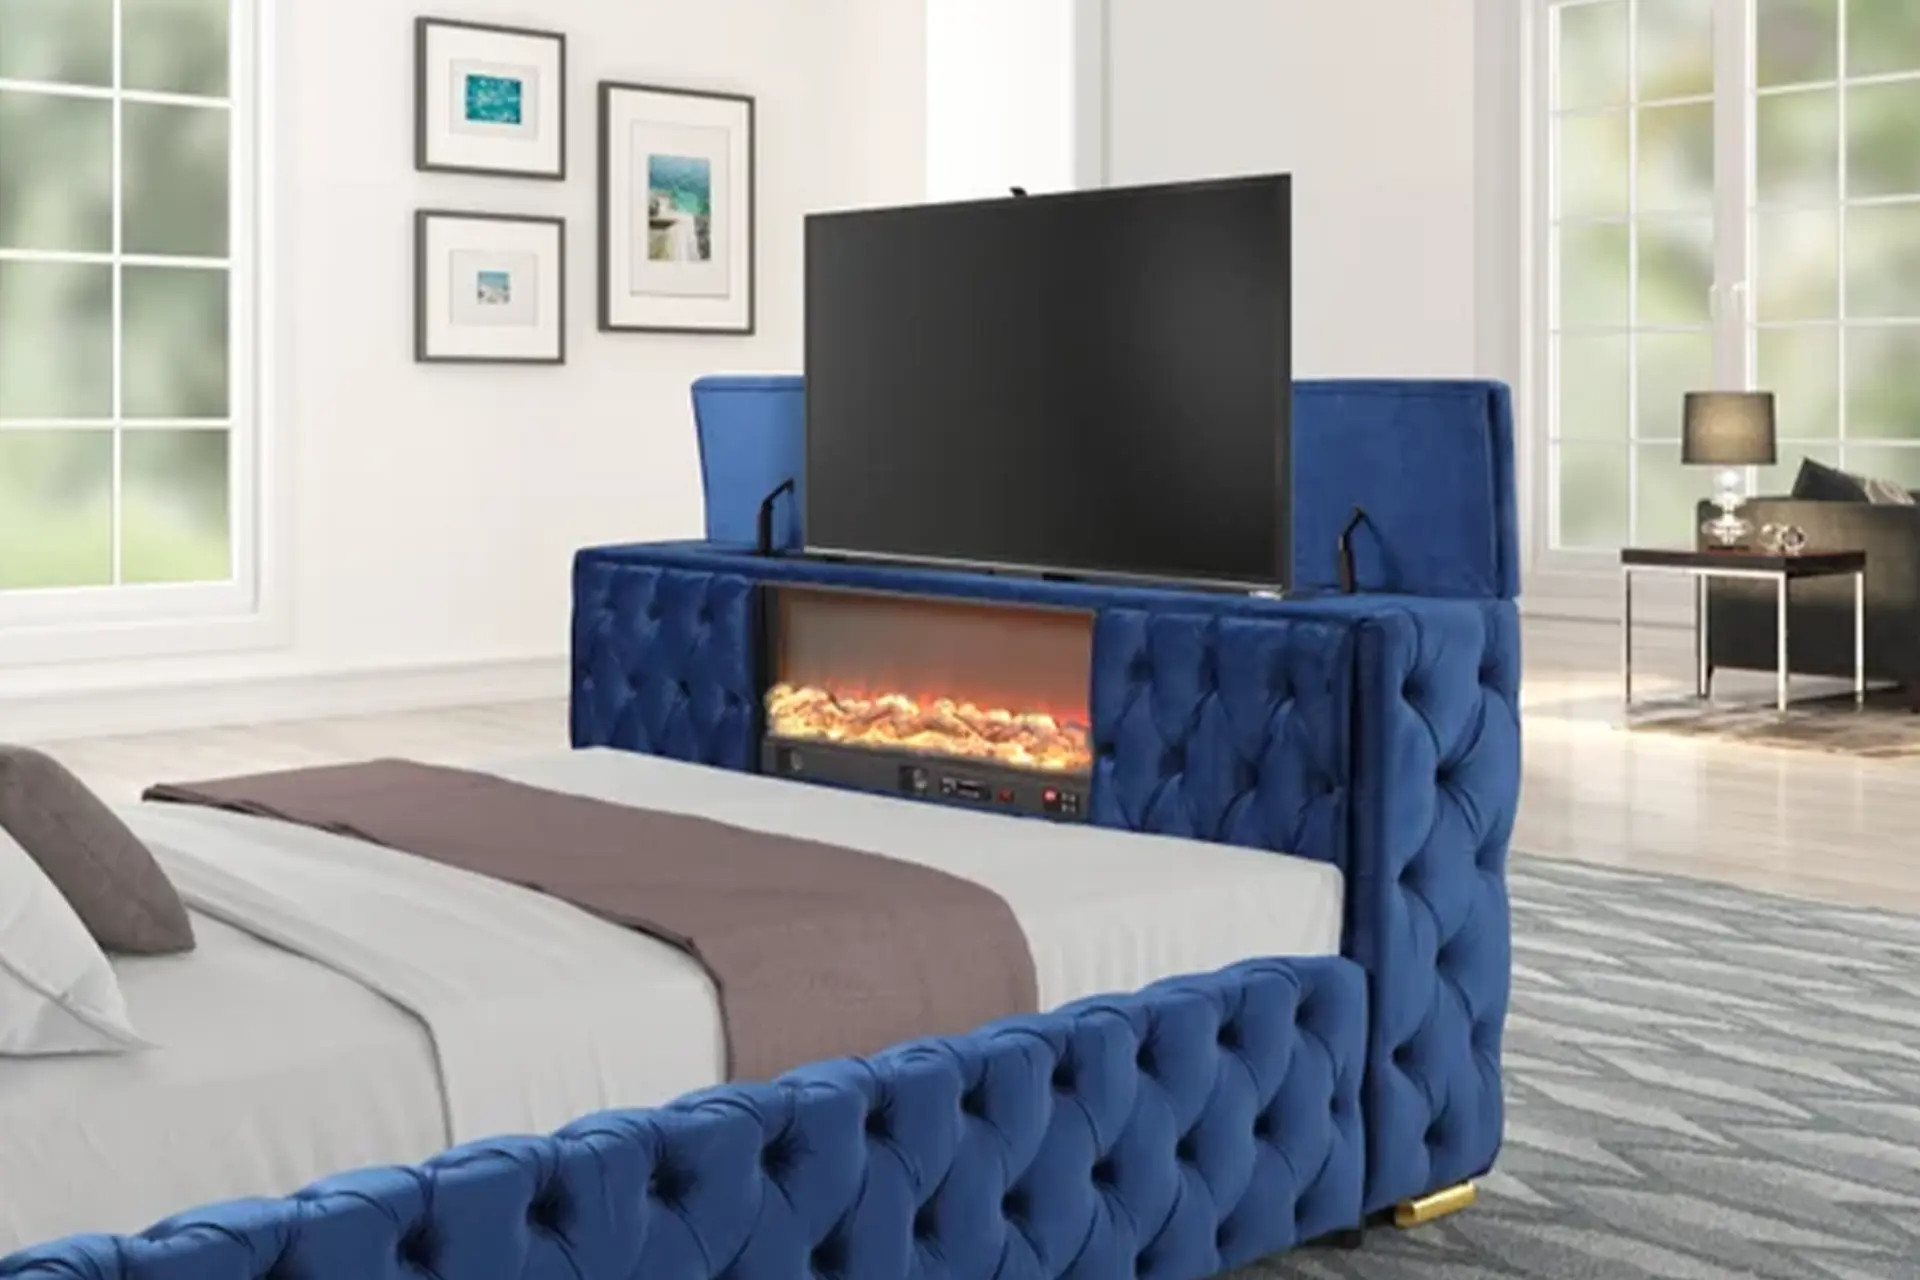 Blue Velvet Fireplace Bed with TV stand and bluetooth speakers.